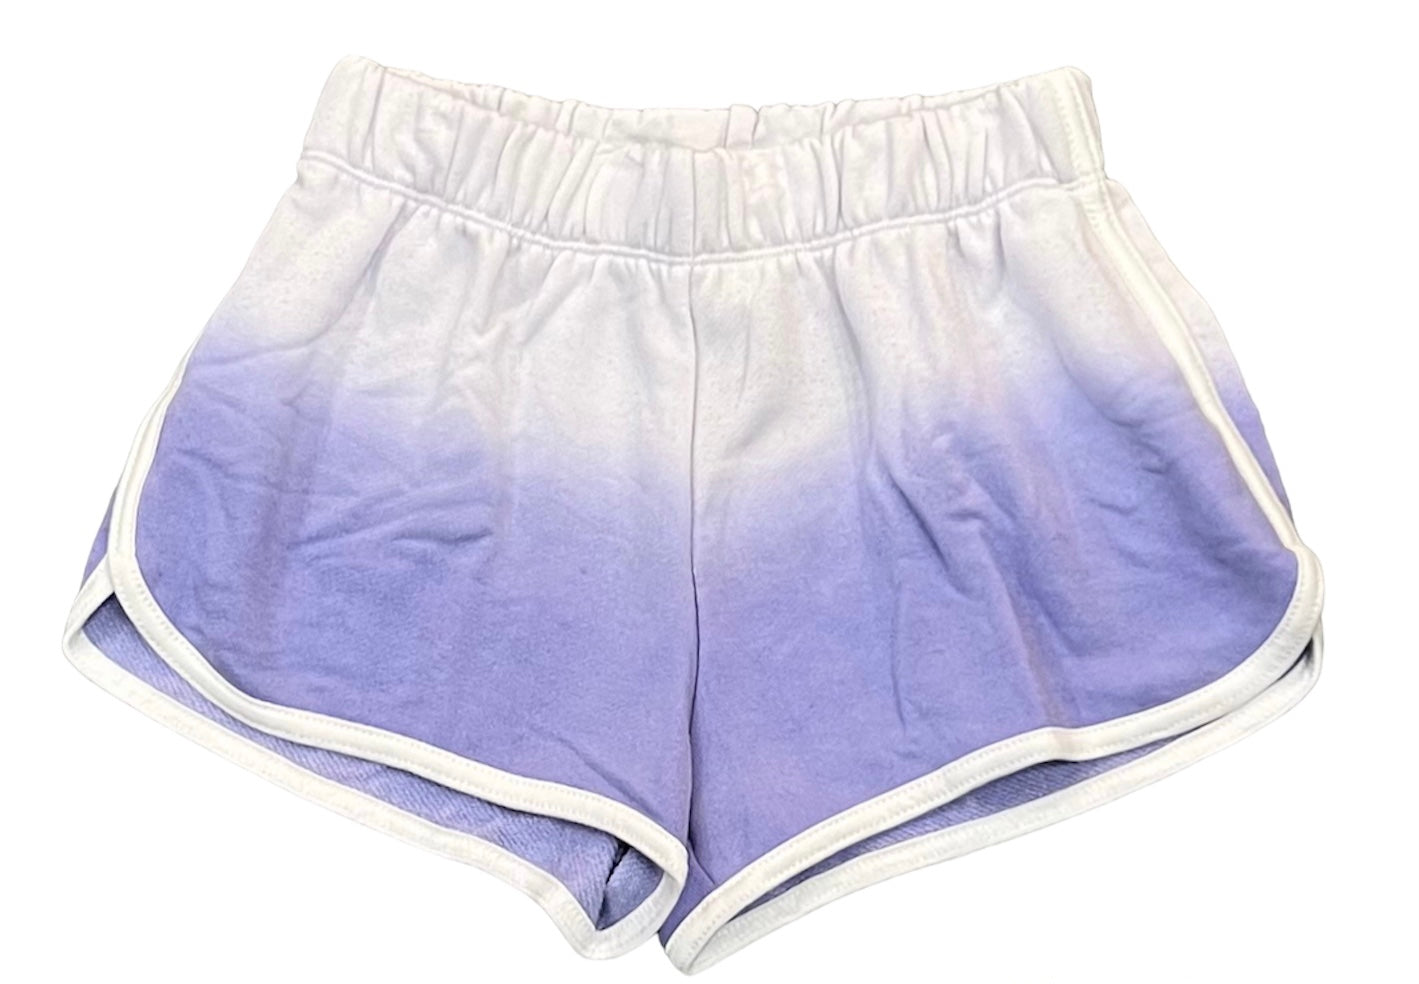 Flowers by Zoe - White/Blue Ombre Shorts